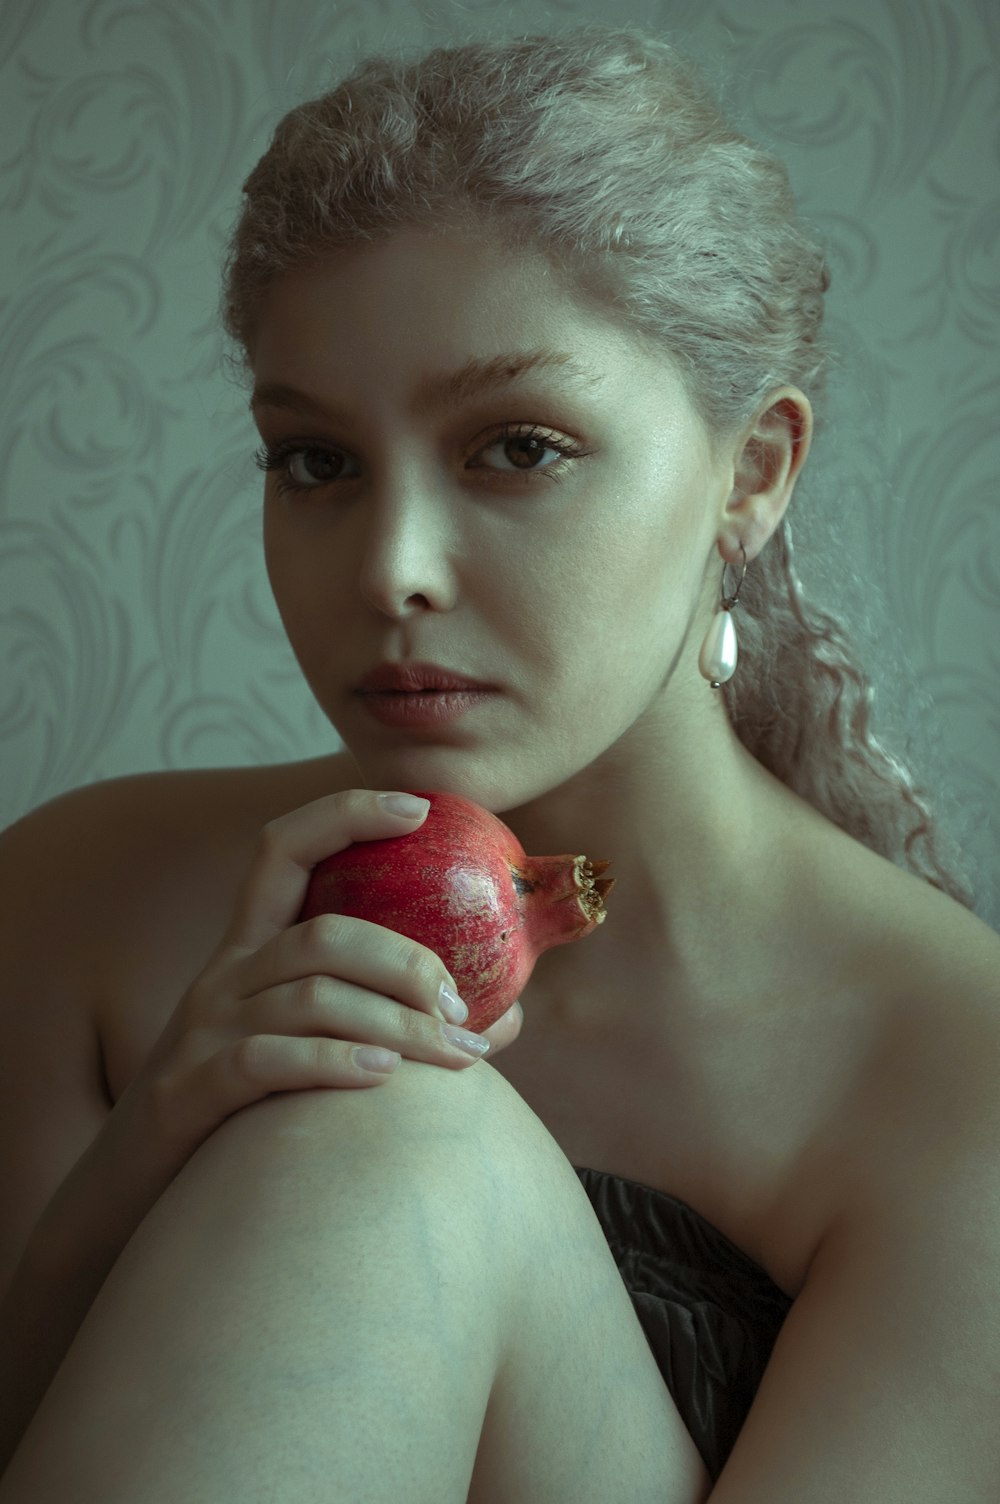 woman holding red apple fruit